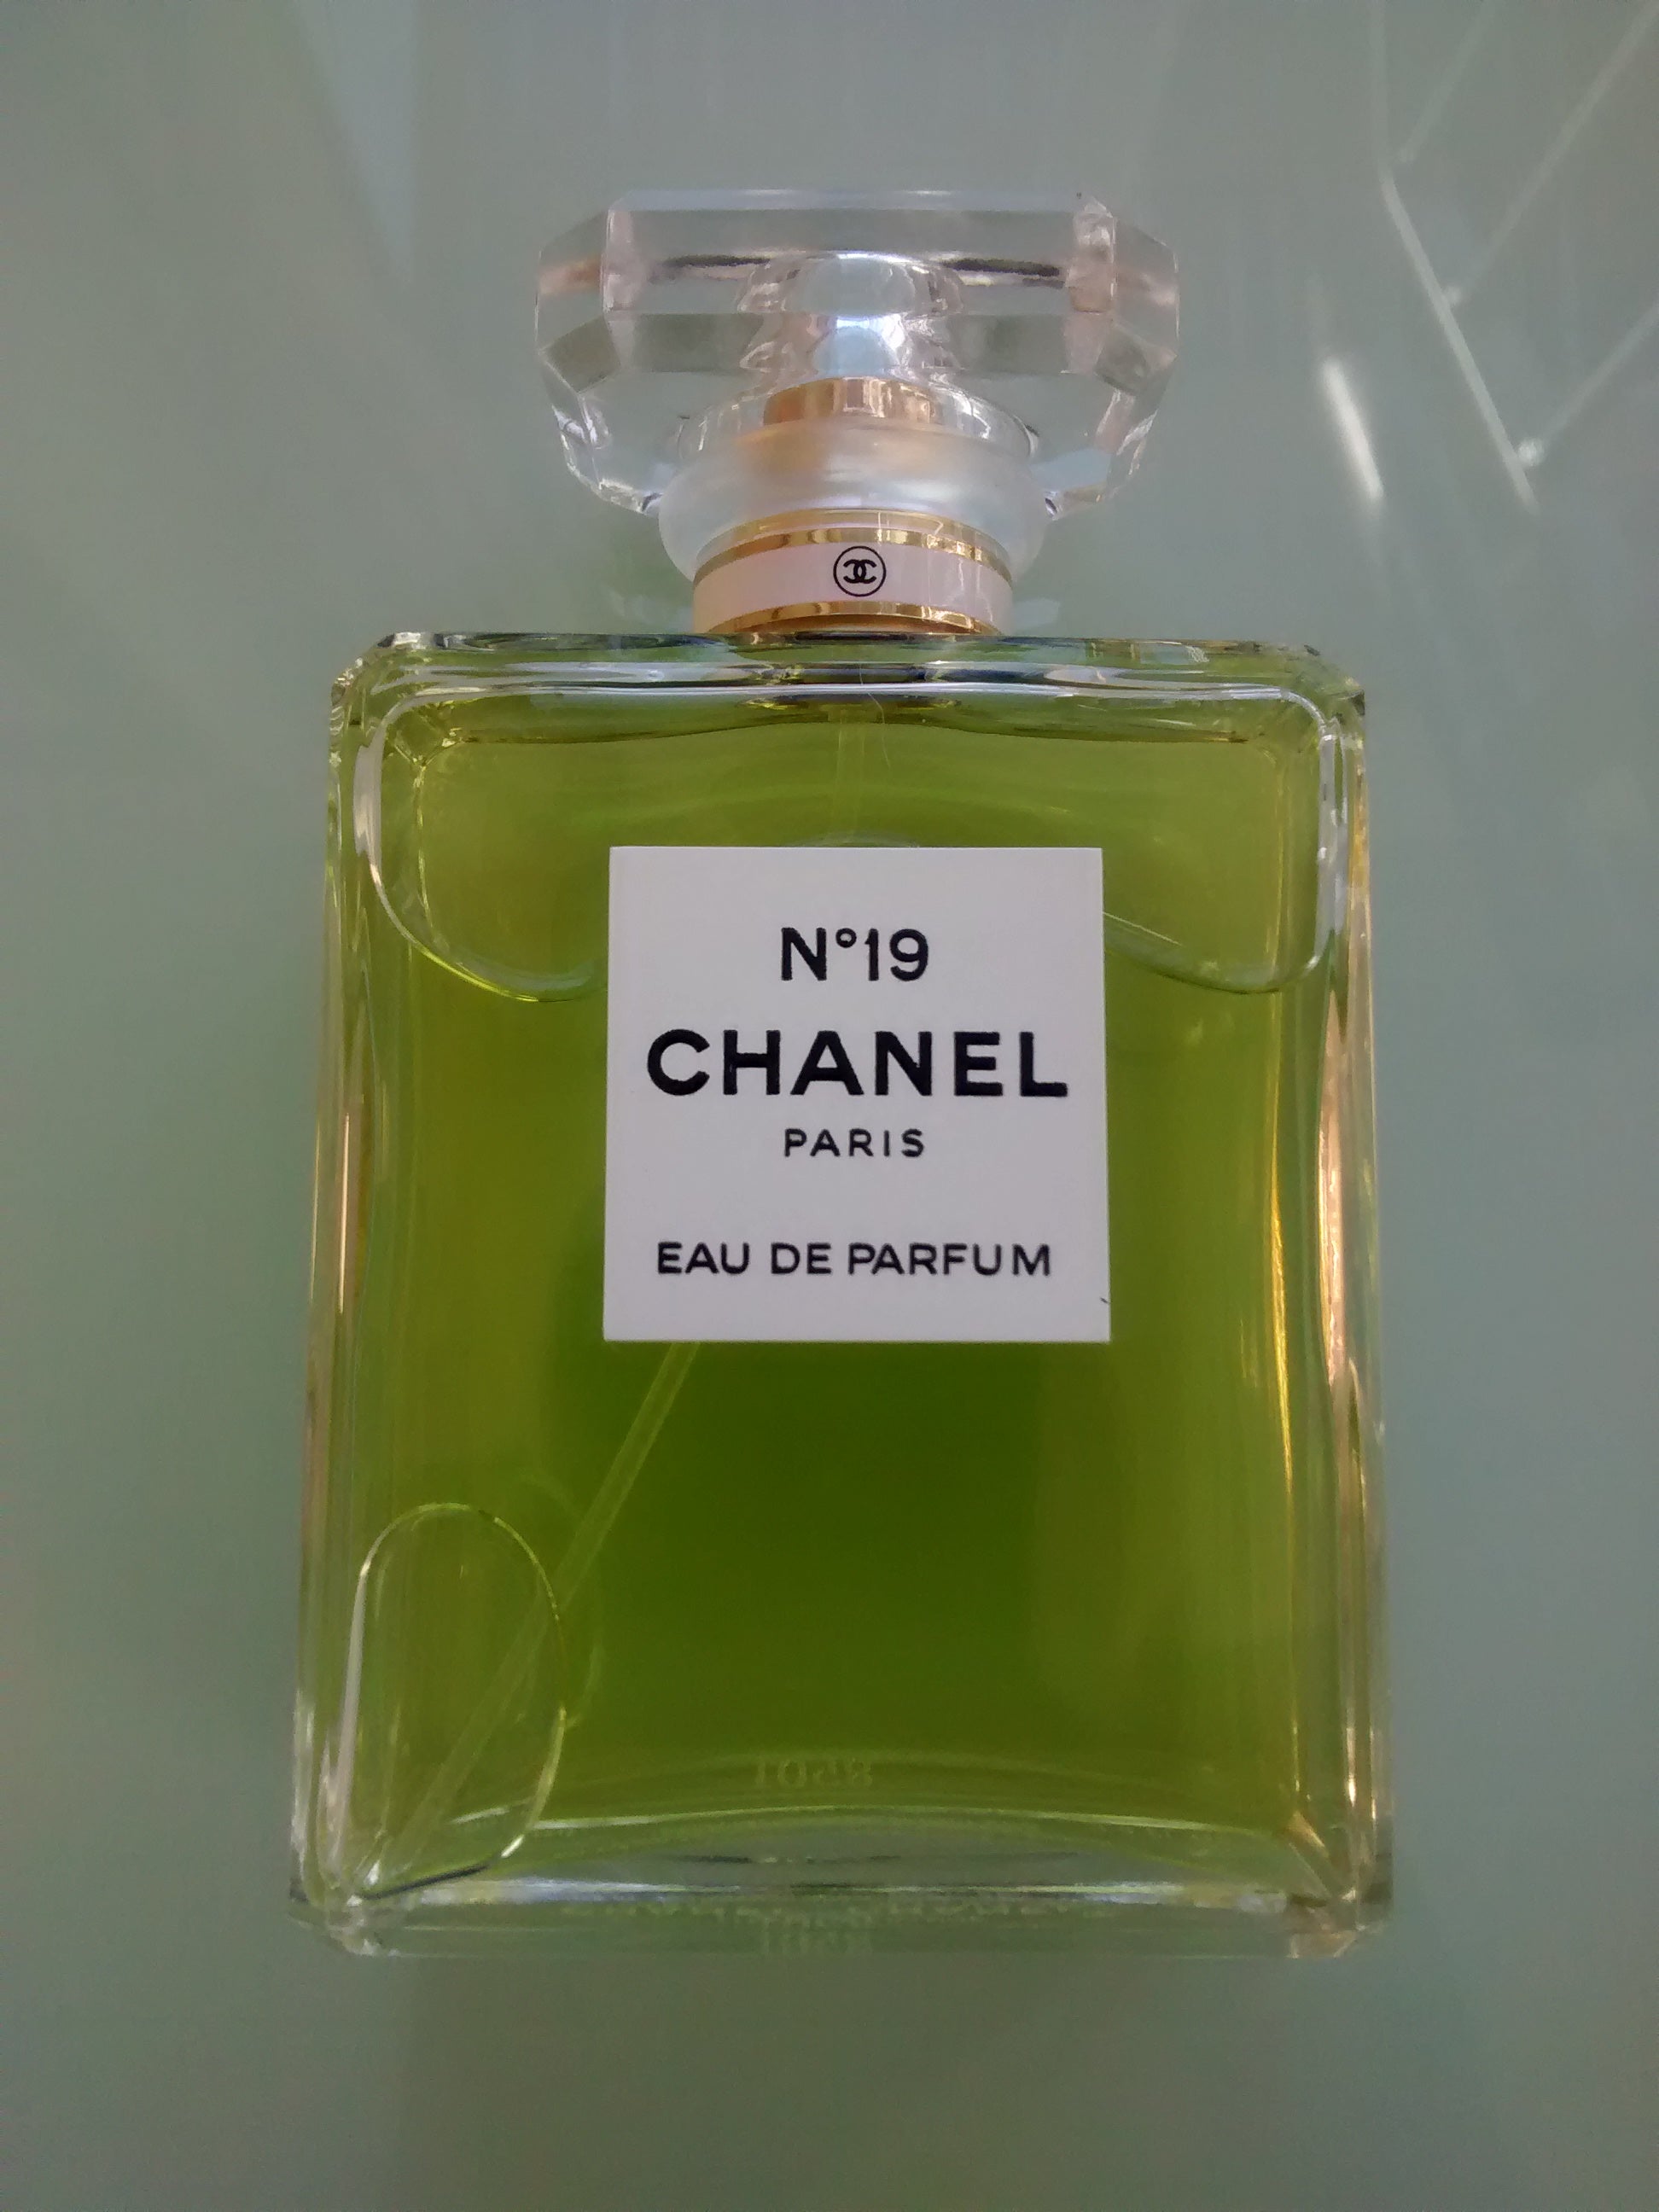 CHANEL No 19 EDT - Reviews